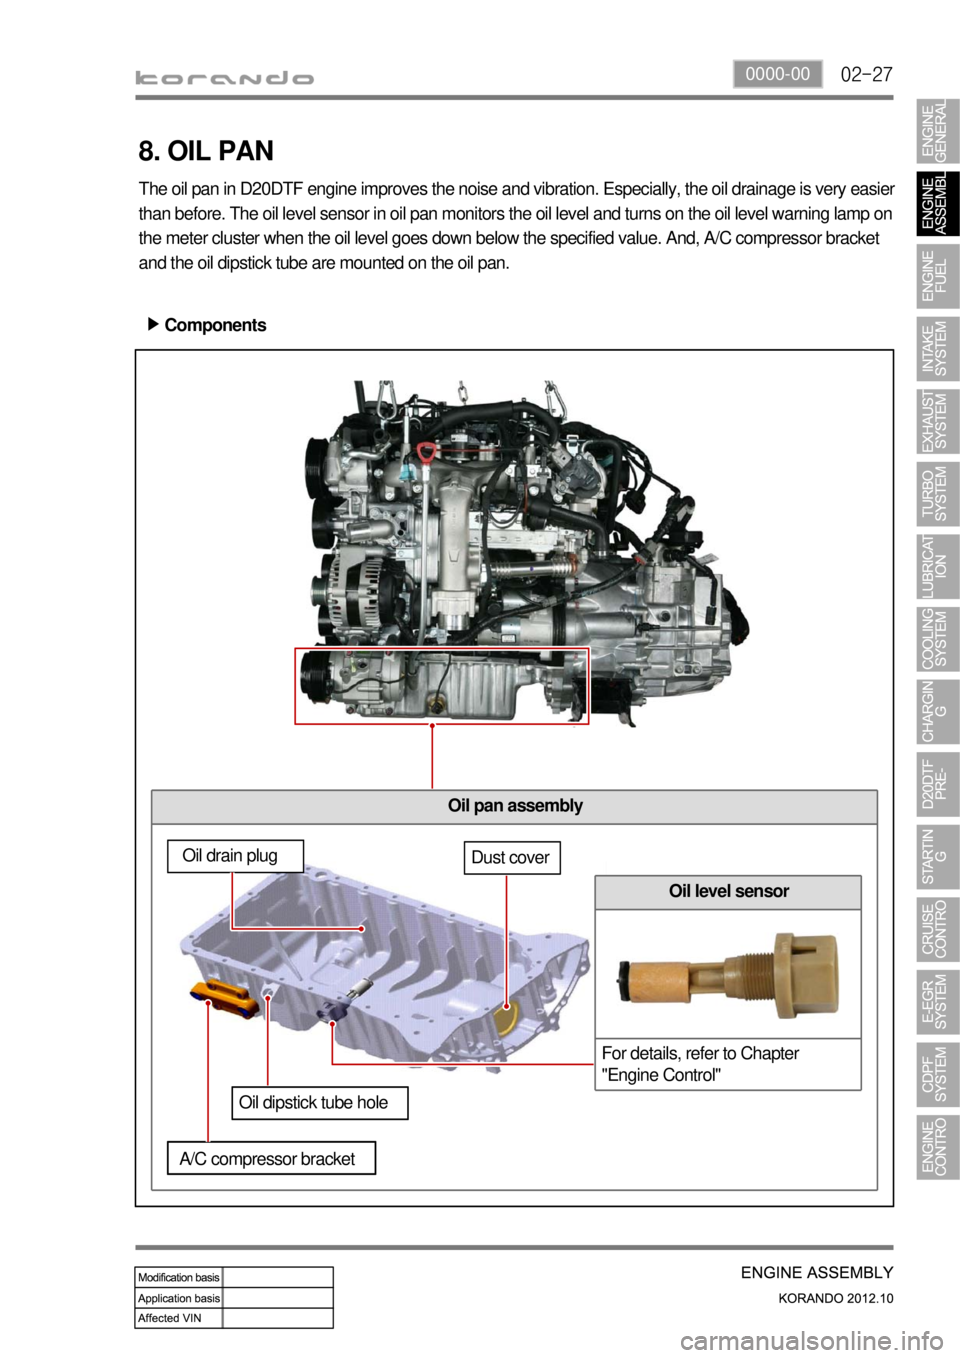 SSANGYONG KORANDO 2012  Service Manual 02-270000-00
Oil pan assembly
8. OIL PAN
The oil pan in D20DTF engine improves the noise and vibration. Especially, the oil drainage is very easier 
than before. The oil level sensor in oil pan monito